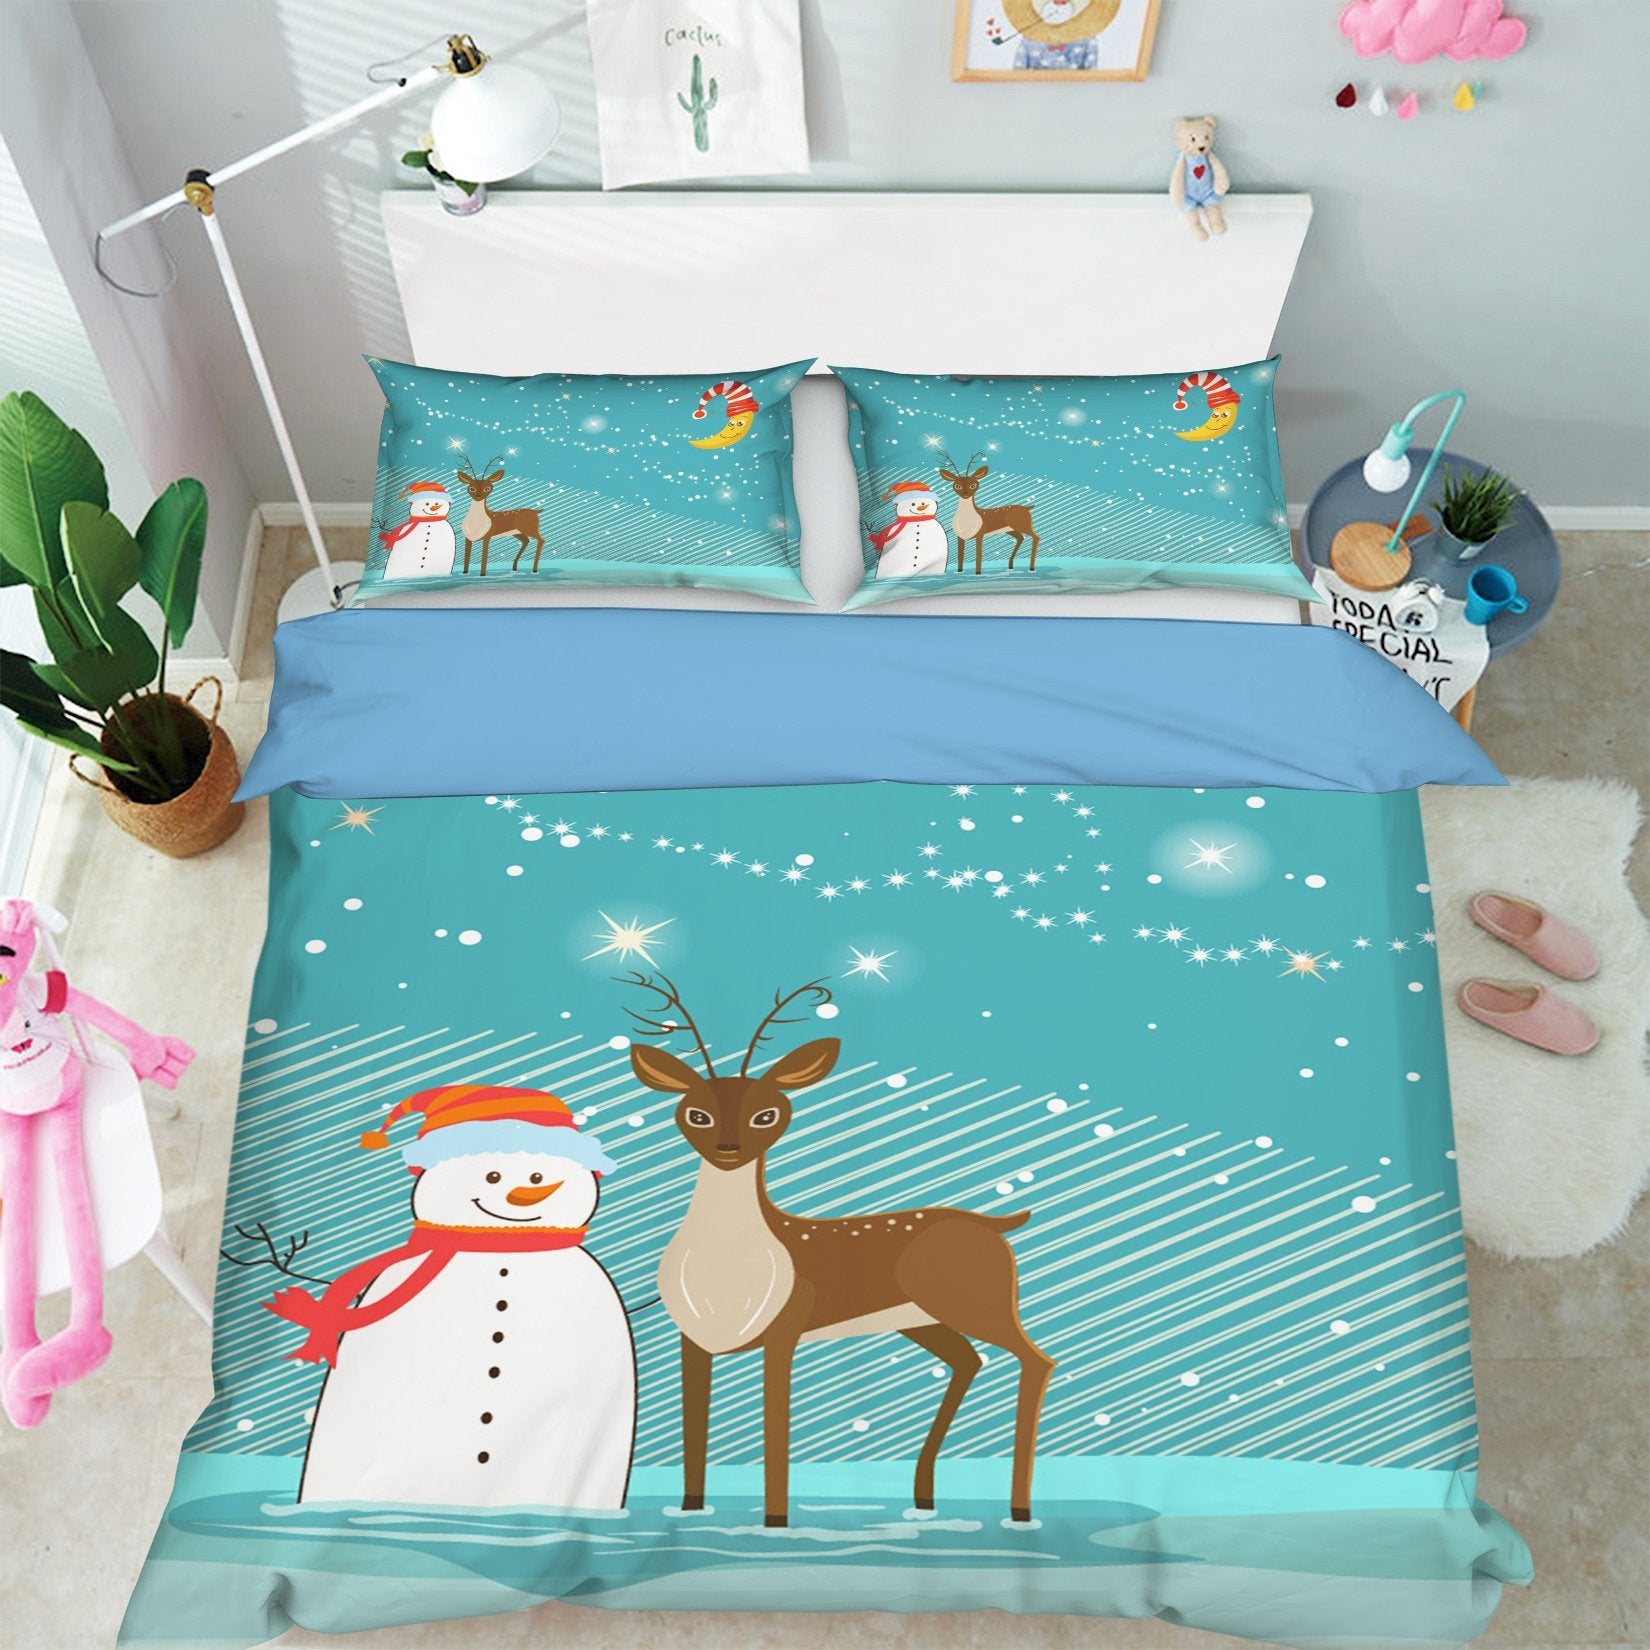 3D Christmas Snowman Deer Staring 30 Bed Pillowcases Quilt Quiet Covers AJ Creativity Home 